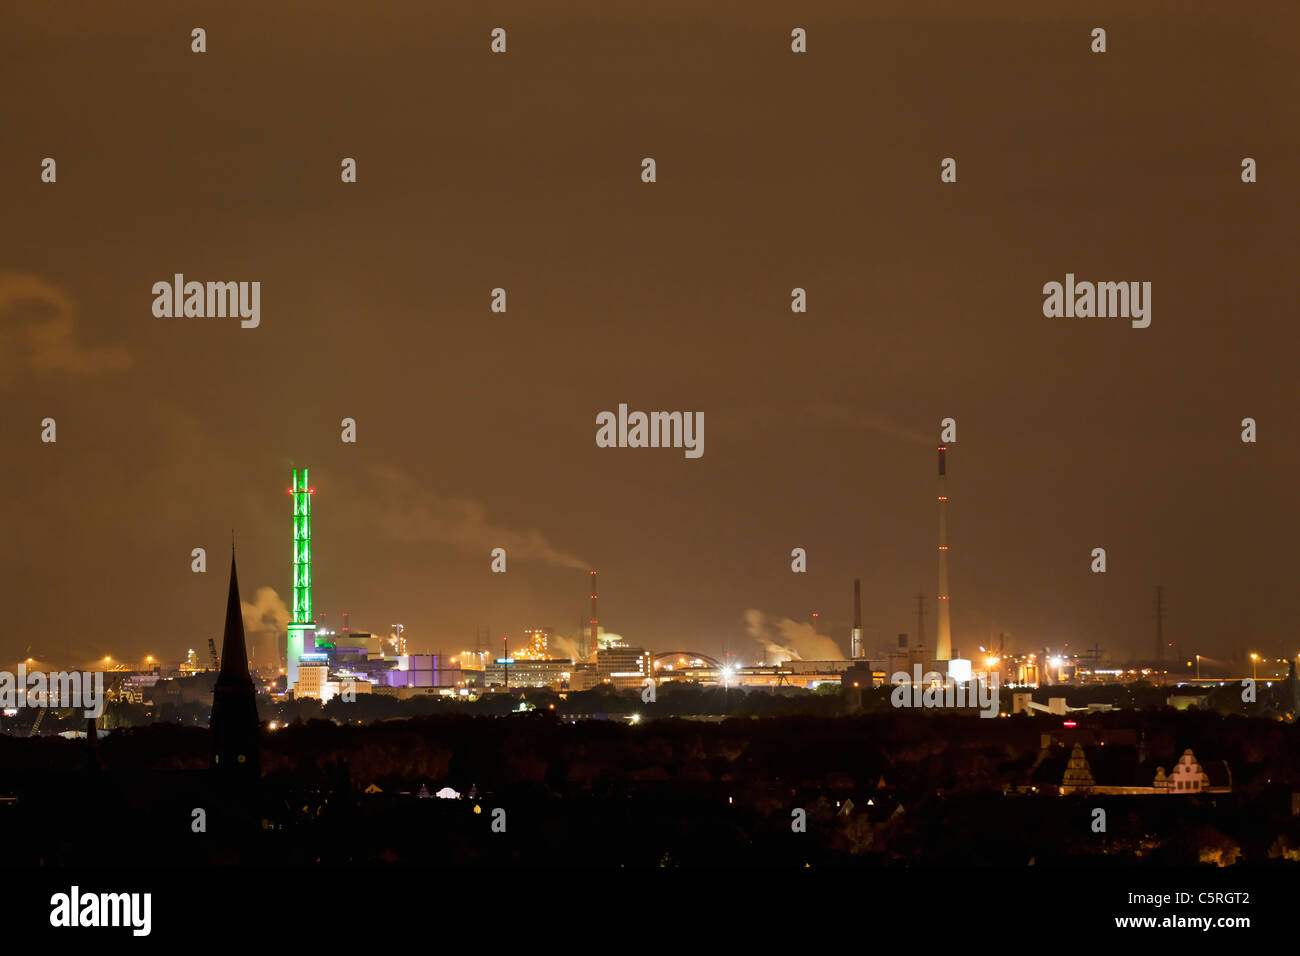 Germany, Nordrhein-Westfalen, Duisburg, View of illuminated green tower and industrial plant at night Stock Photo